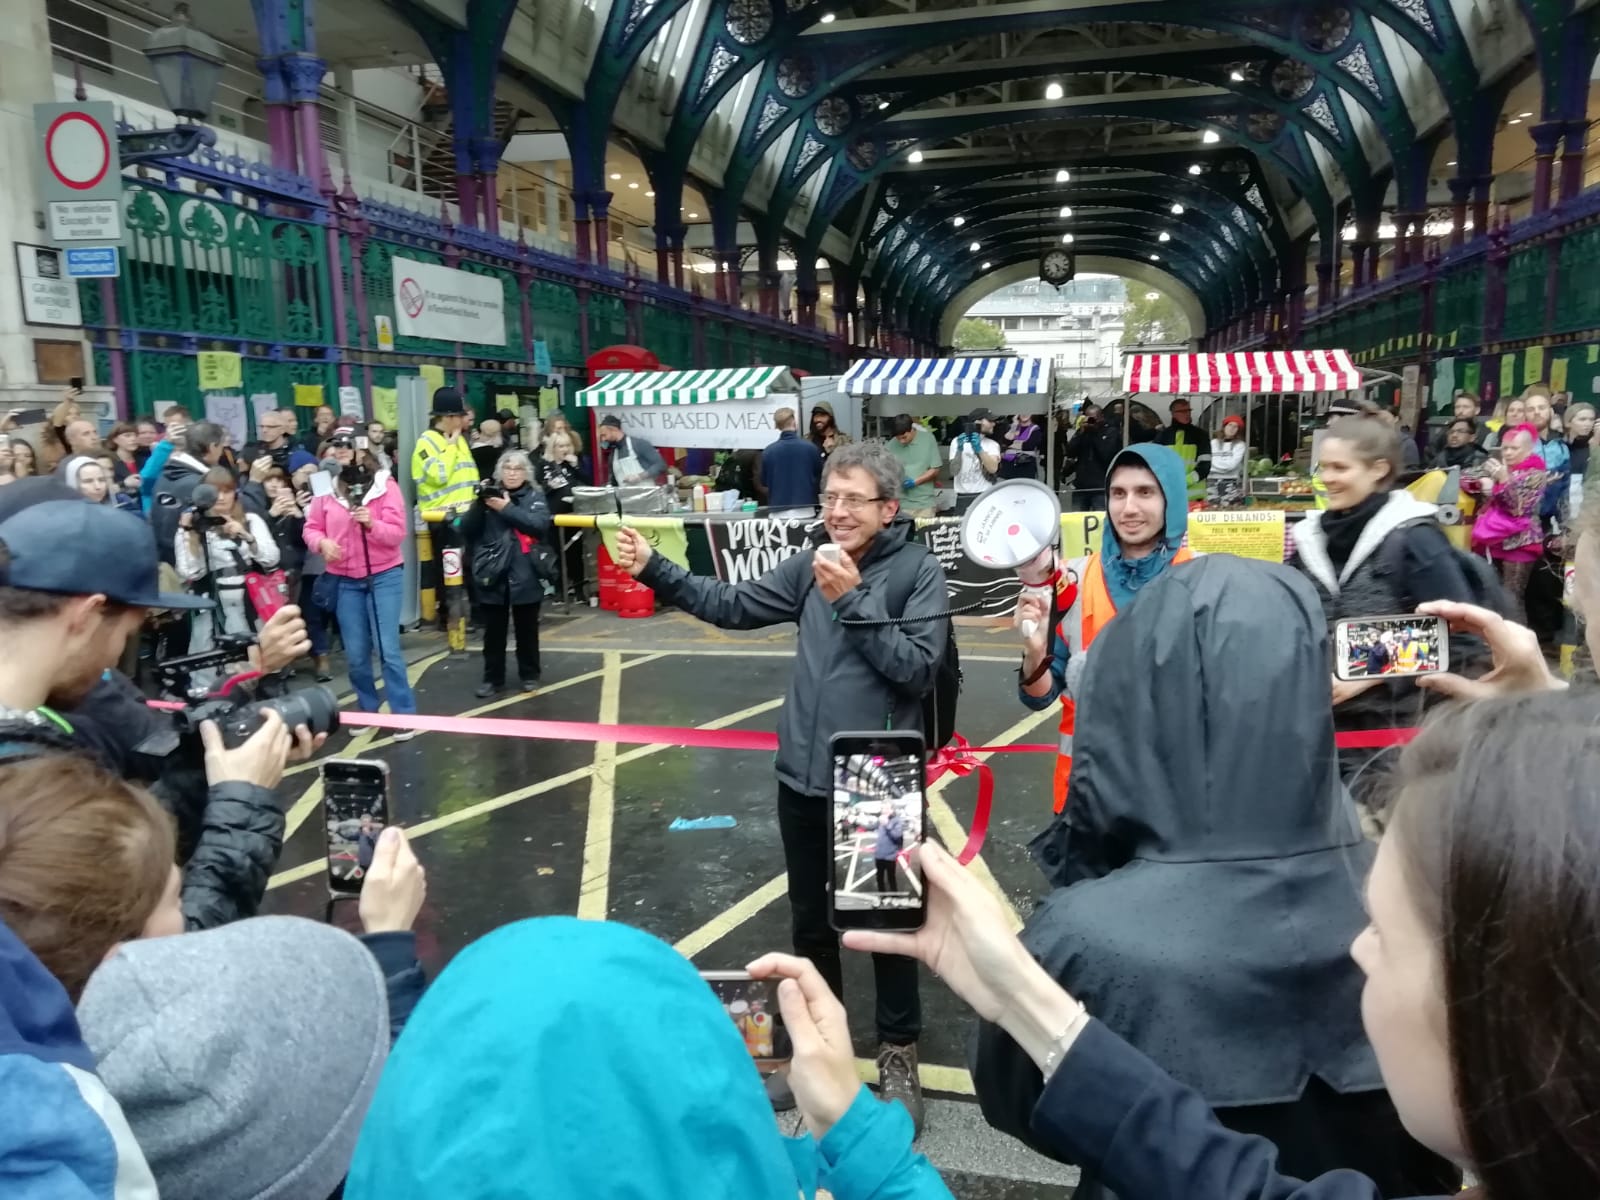 George Monbiot at the Animal Rebellion occupation of Smithfield Meat Market in London